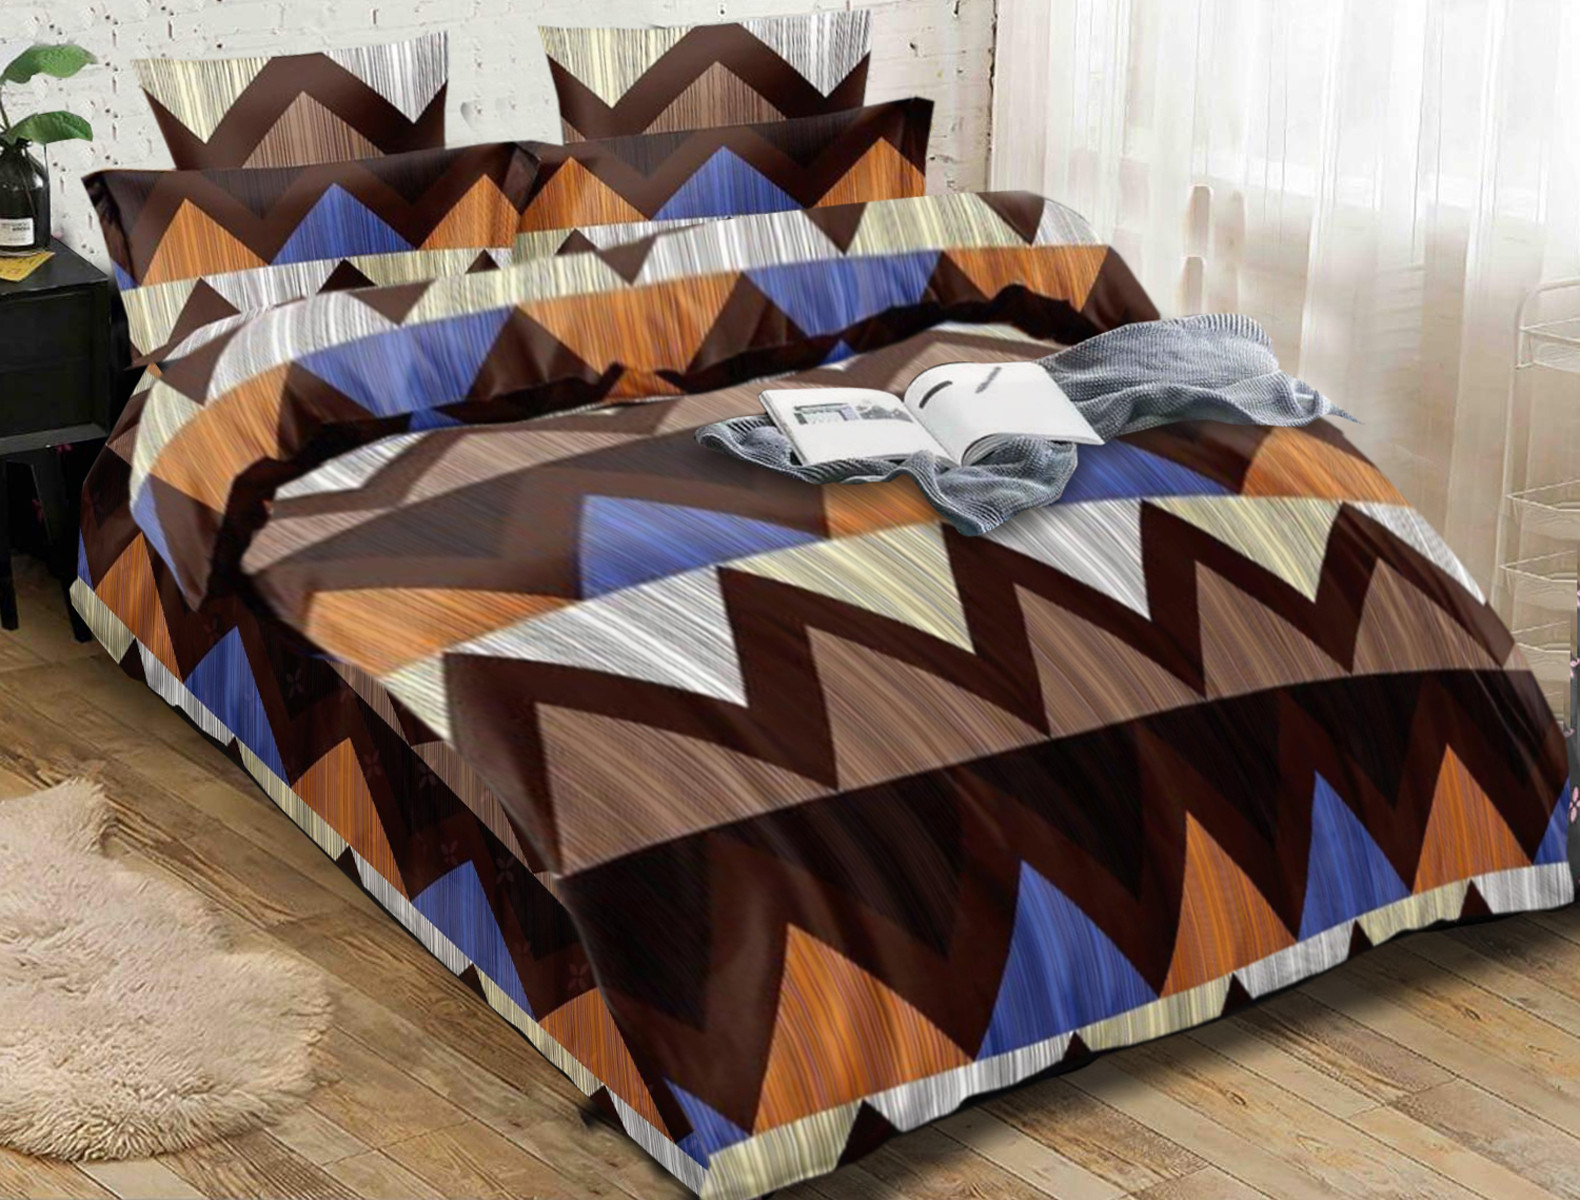 Kuber Industries Abstract Waves Print Glace Cotton AC Comforter King Size Bed Comforter, Double Bed Sheet, 2 Pillow Cover (Brown, 90x100 Inches)-Set of 4 Pieces